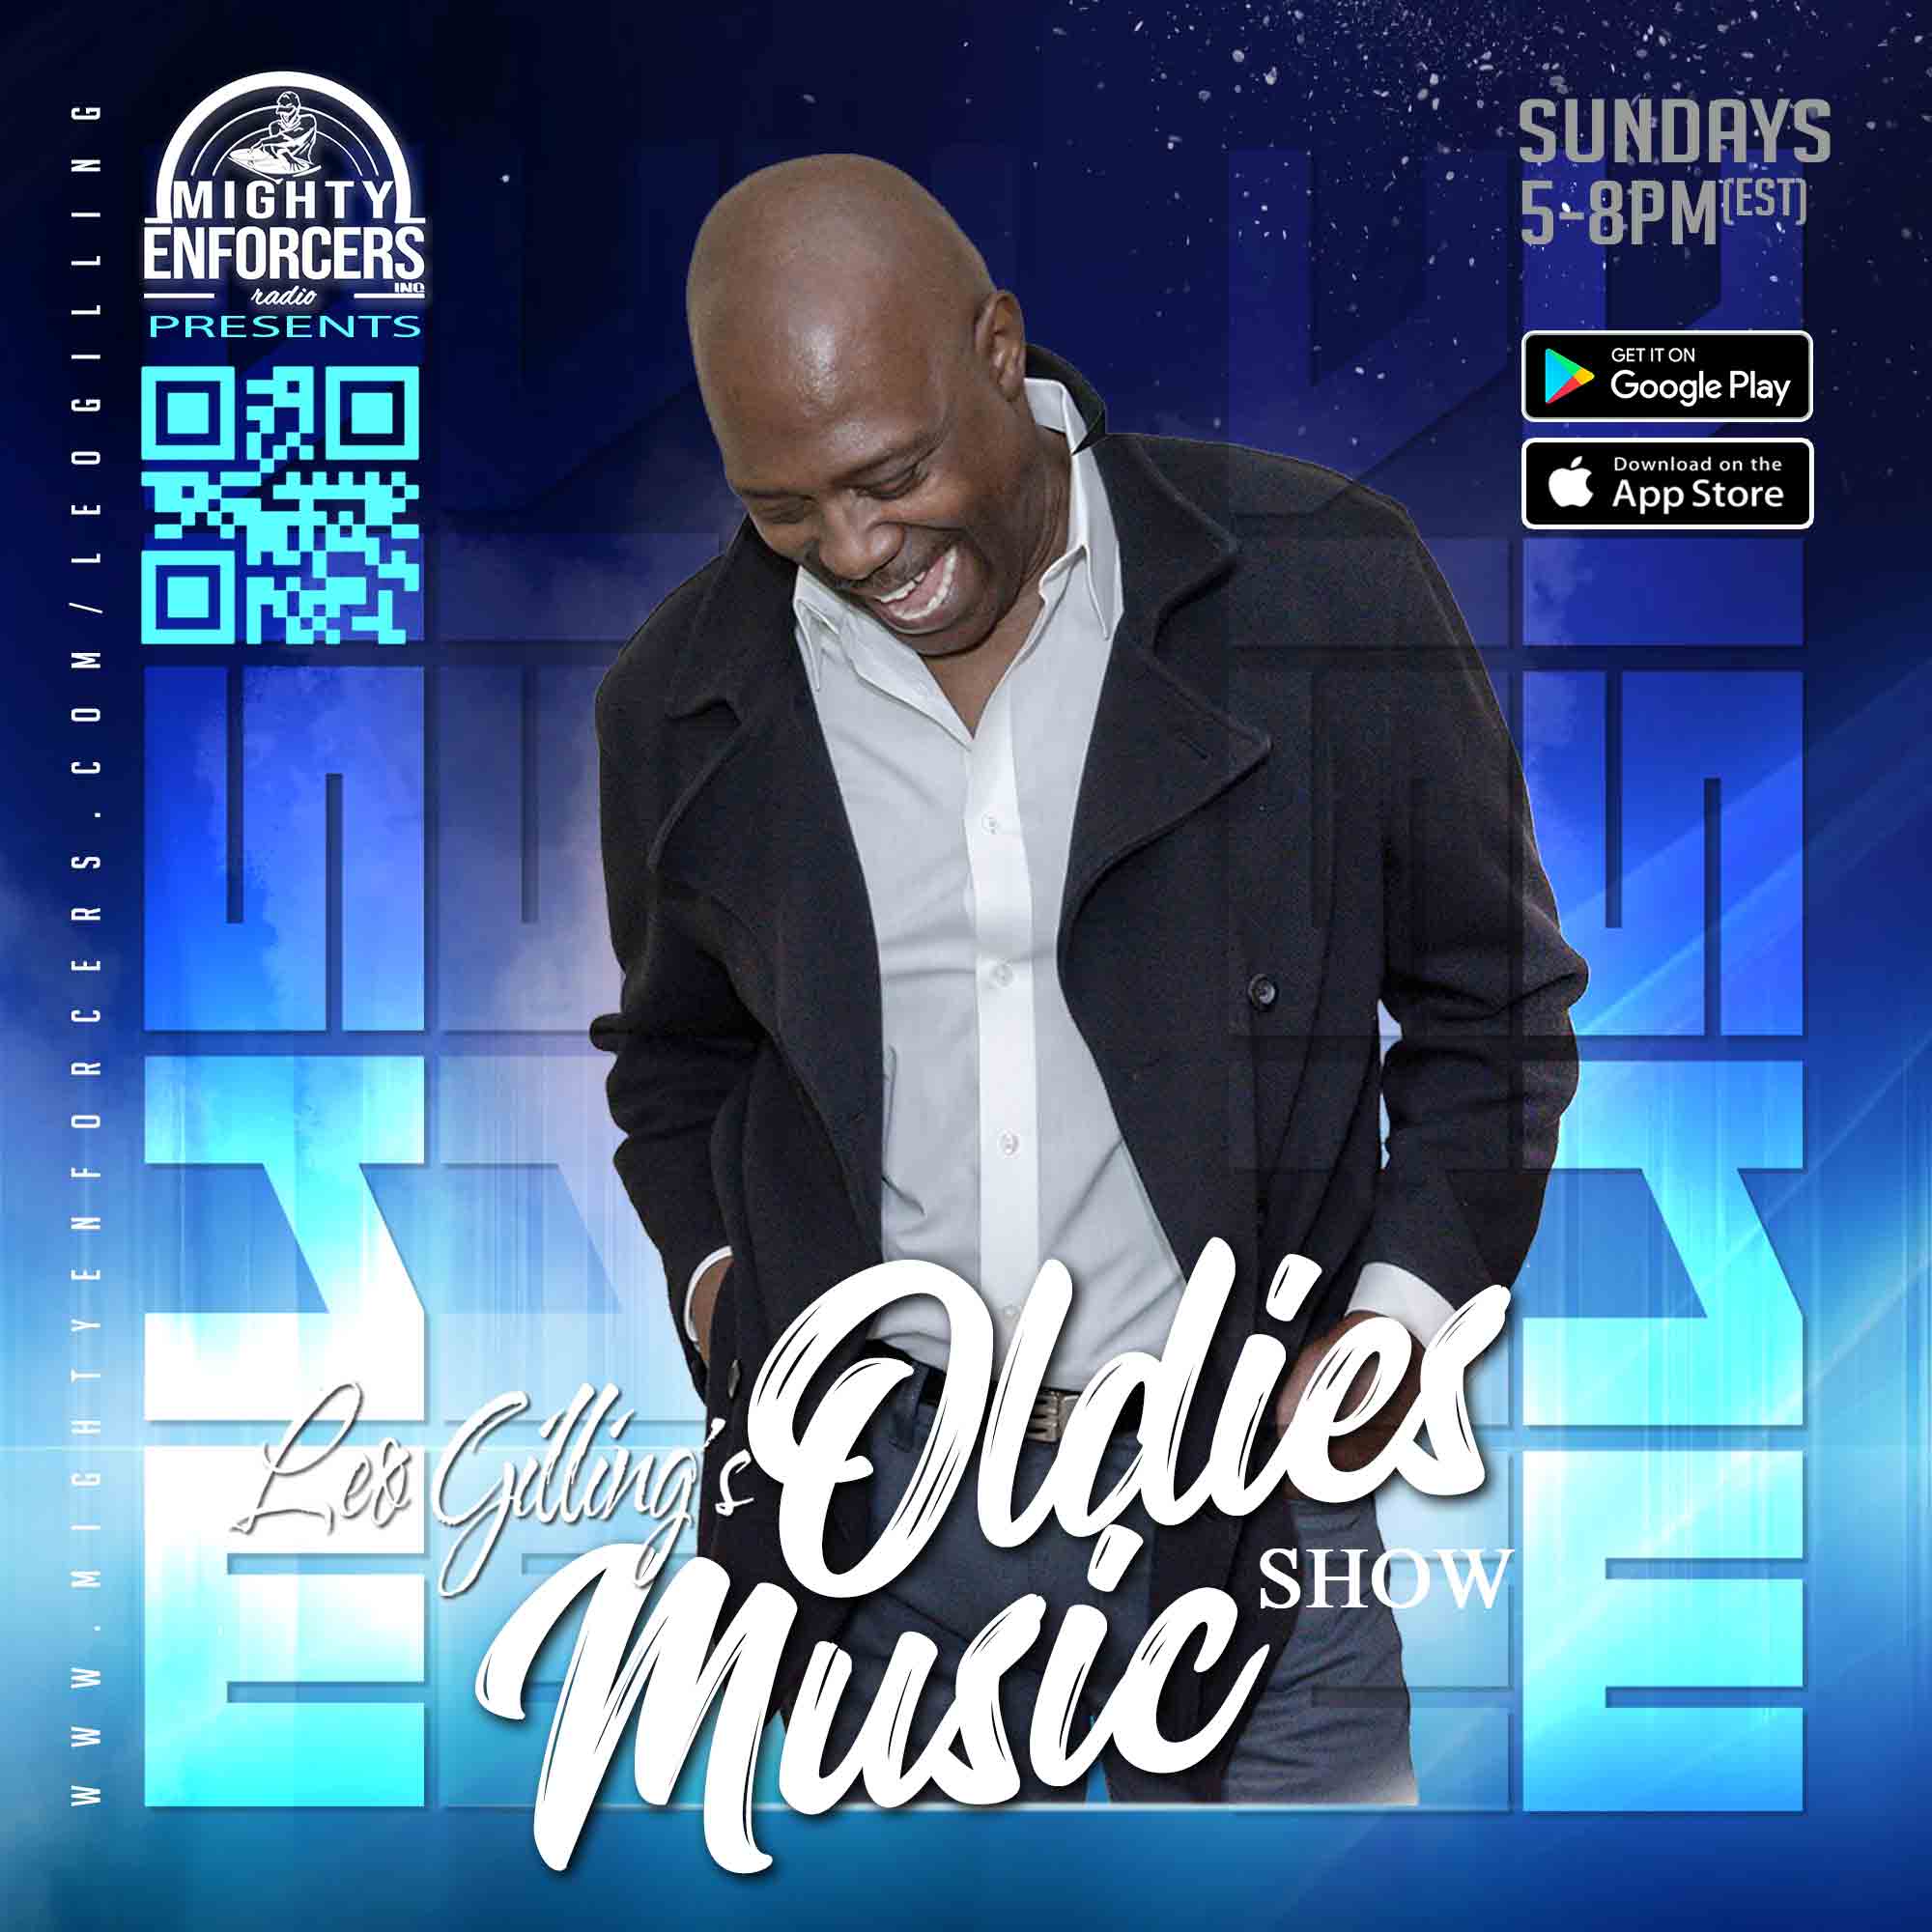 Leo Gilling's Oldies Music Show